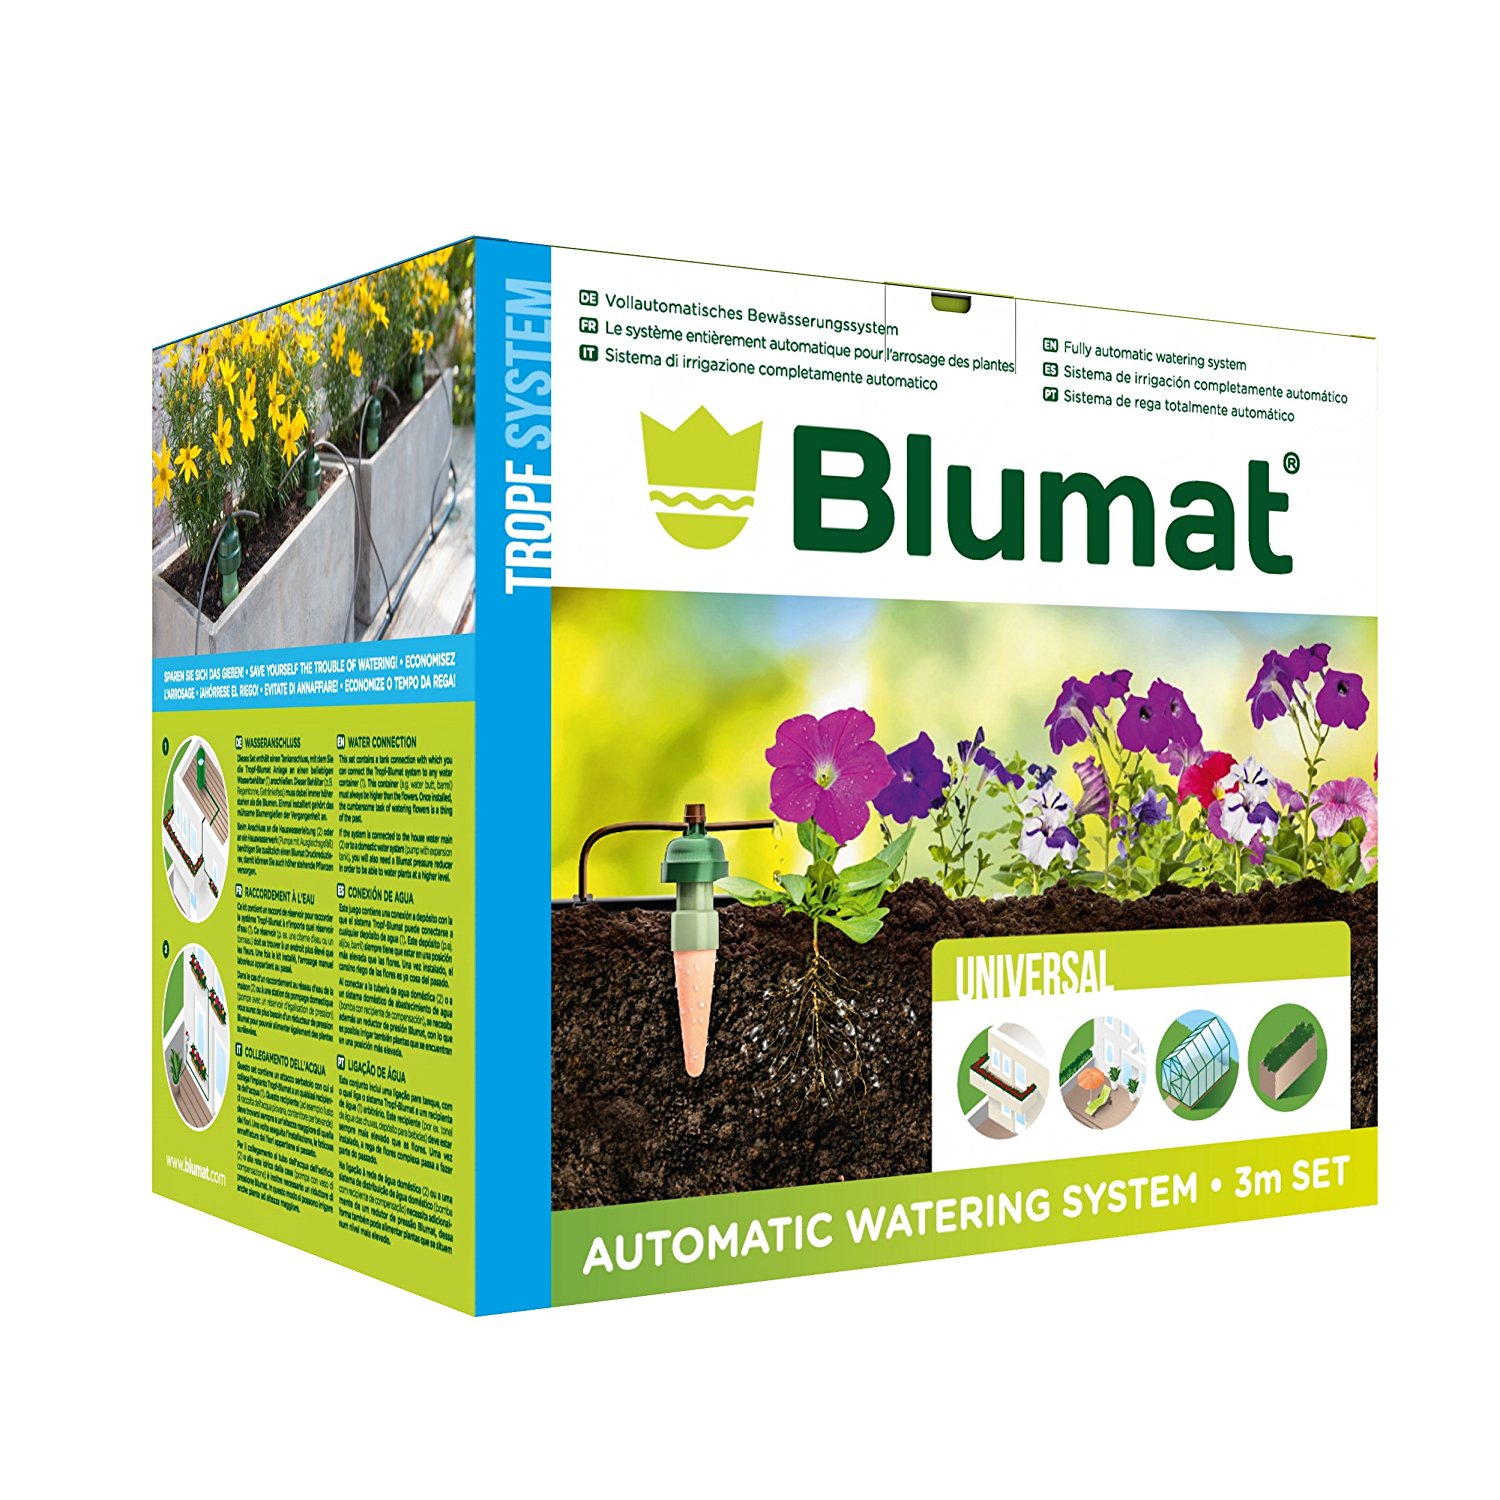 Blumat Drip System Case of 50 Sensors Smart Automatic Watering System 